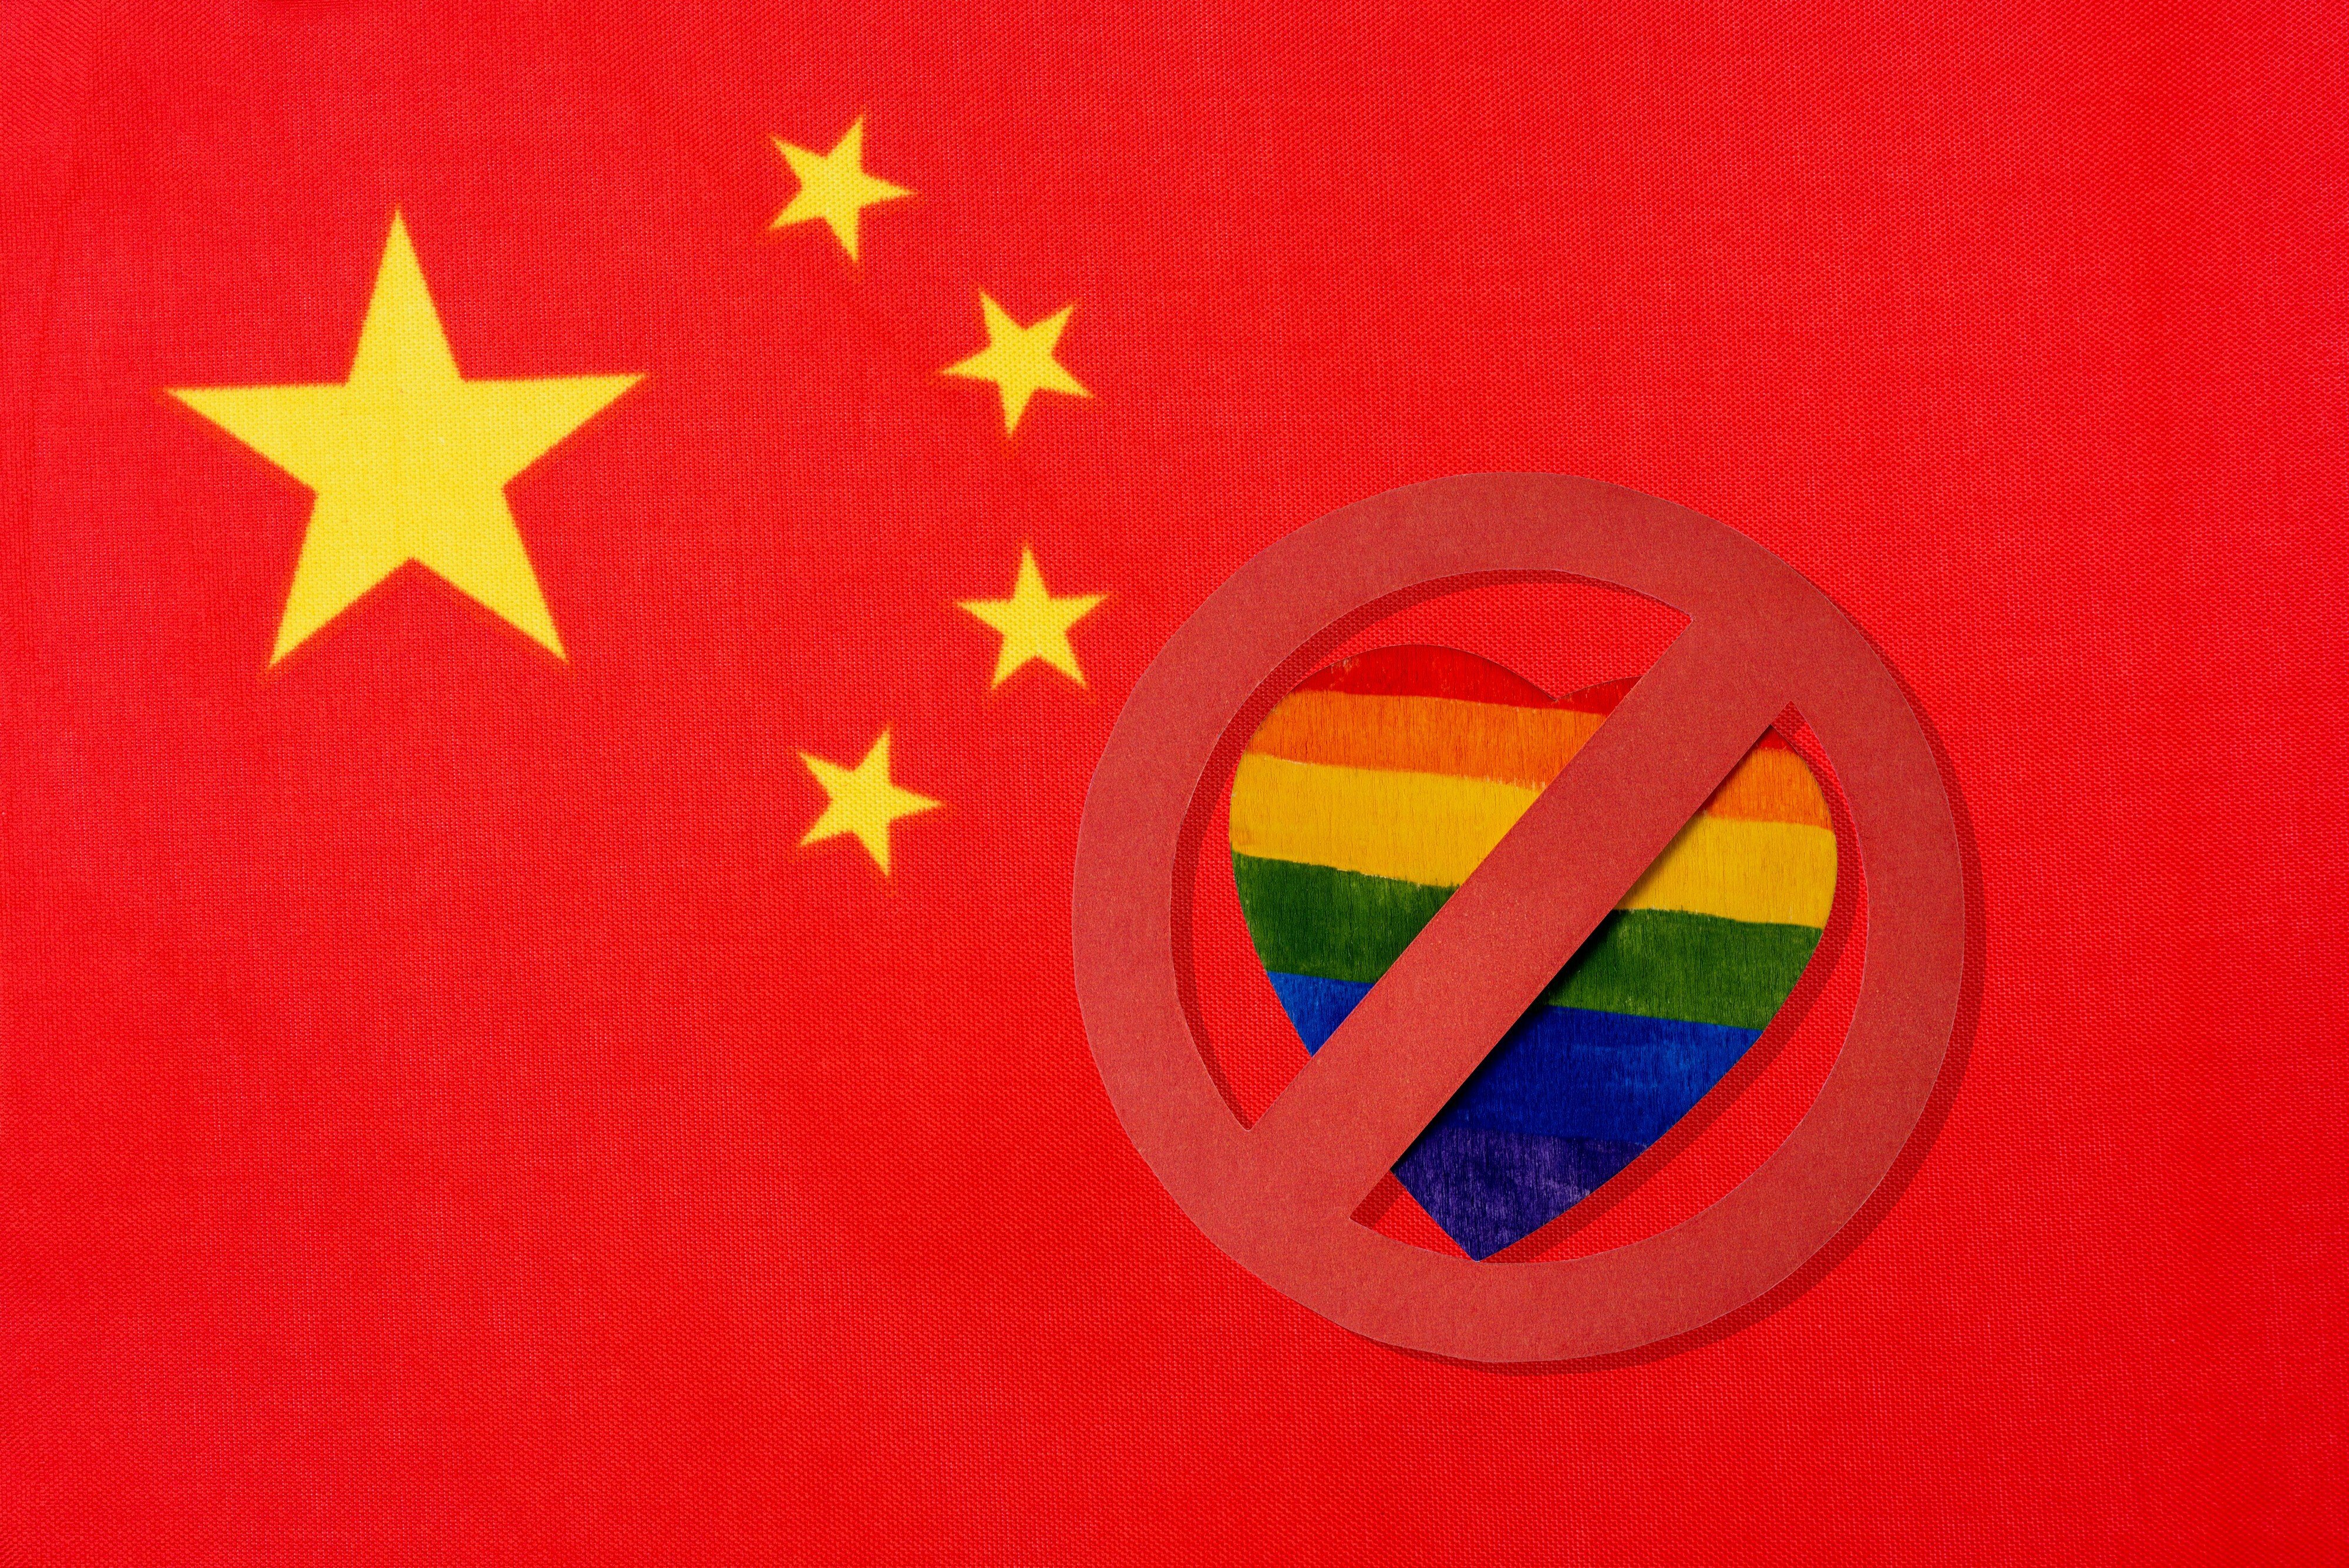 Many in China regard homosexuality as an imported Western concept. Photo: Shutterstock